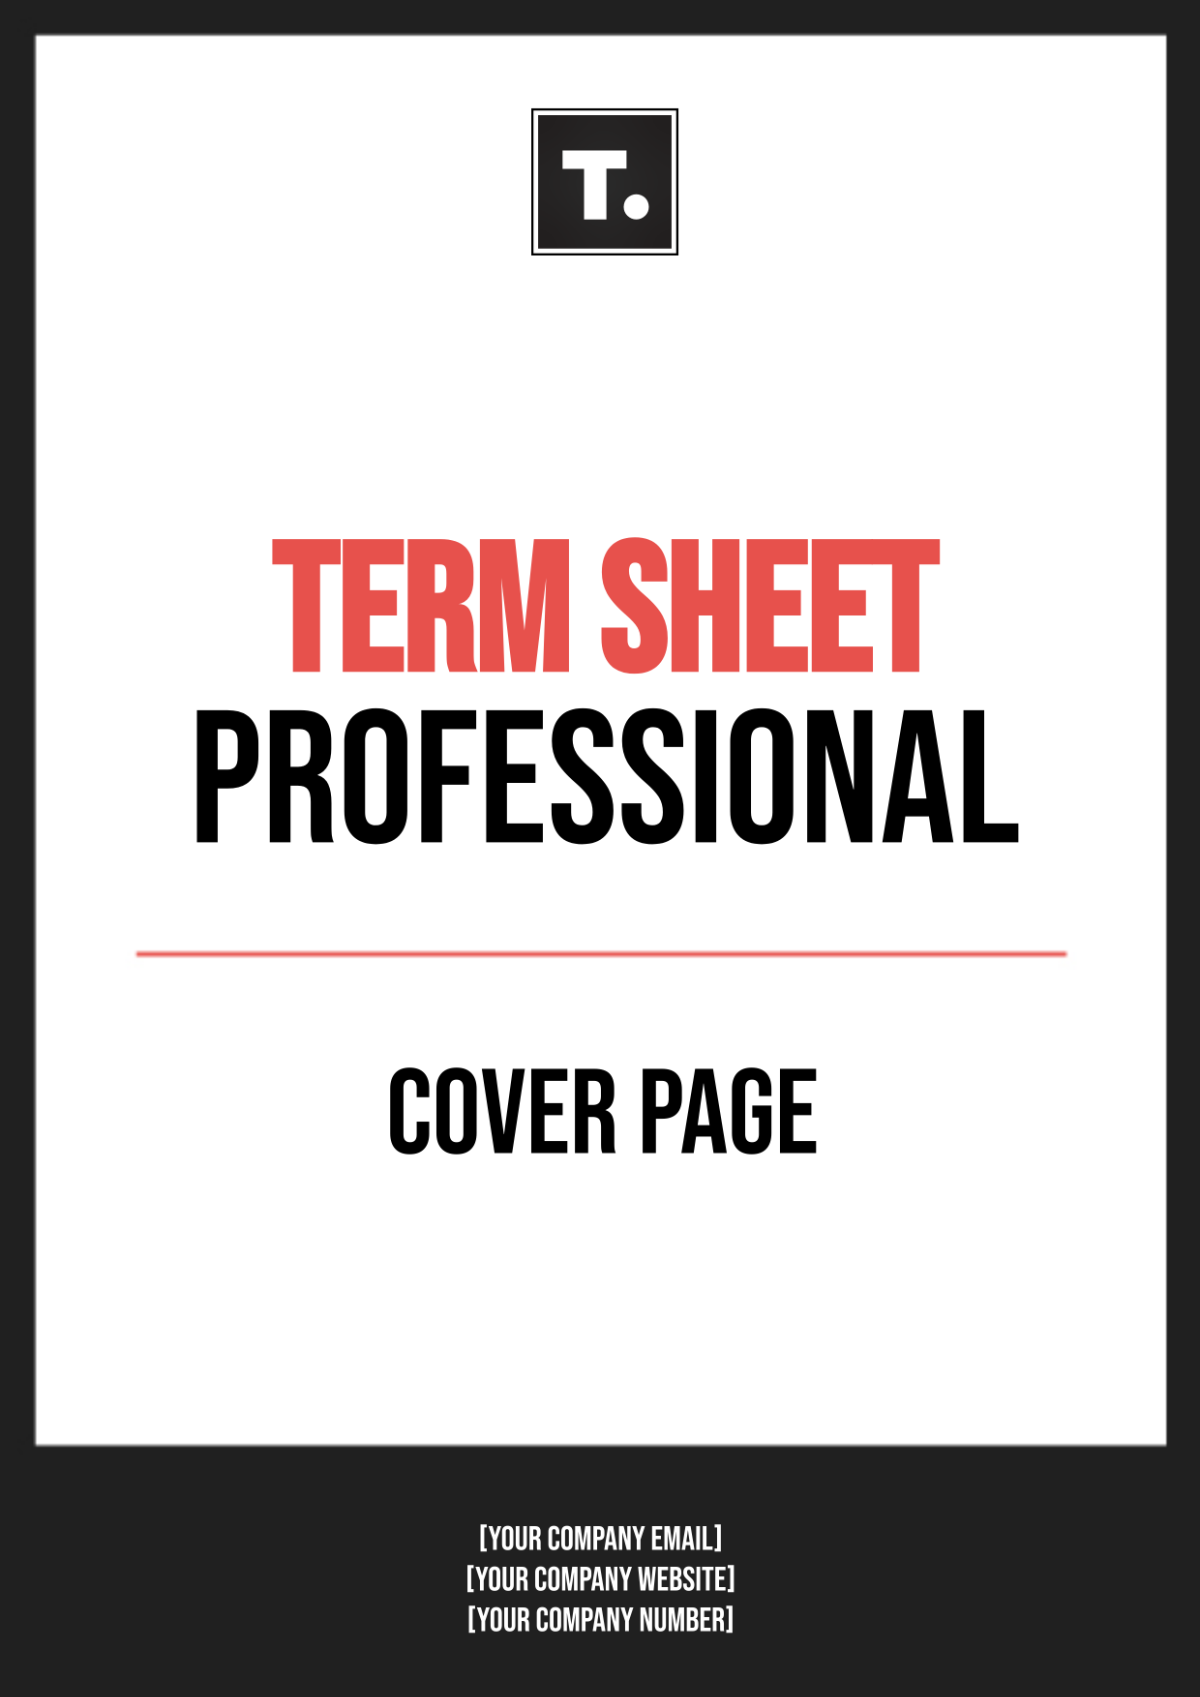 Term Sheet Professional Cover Page